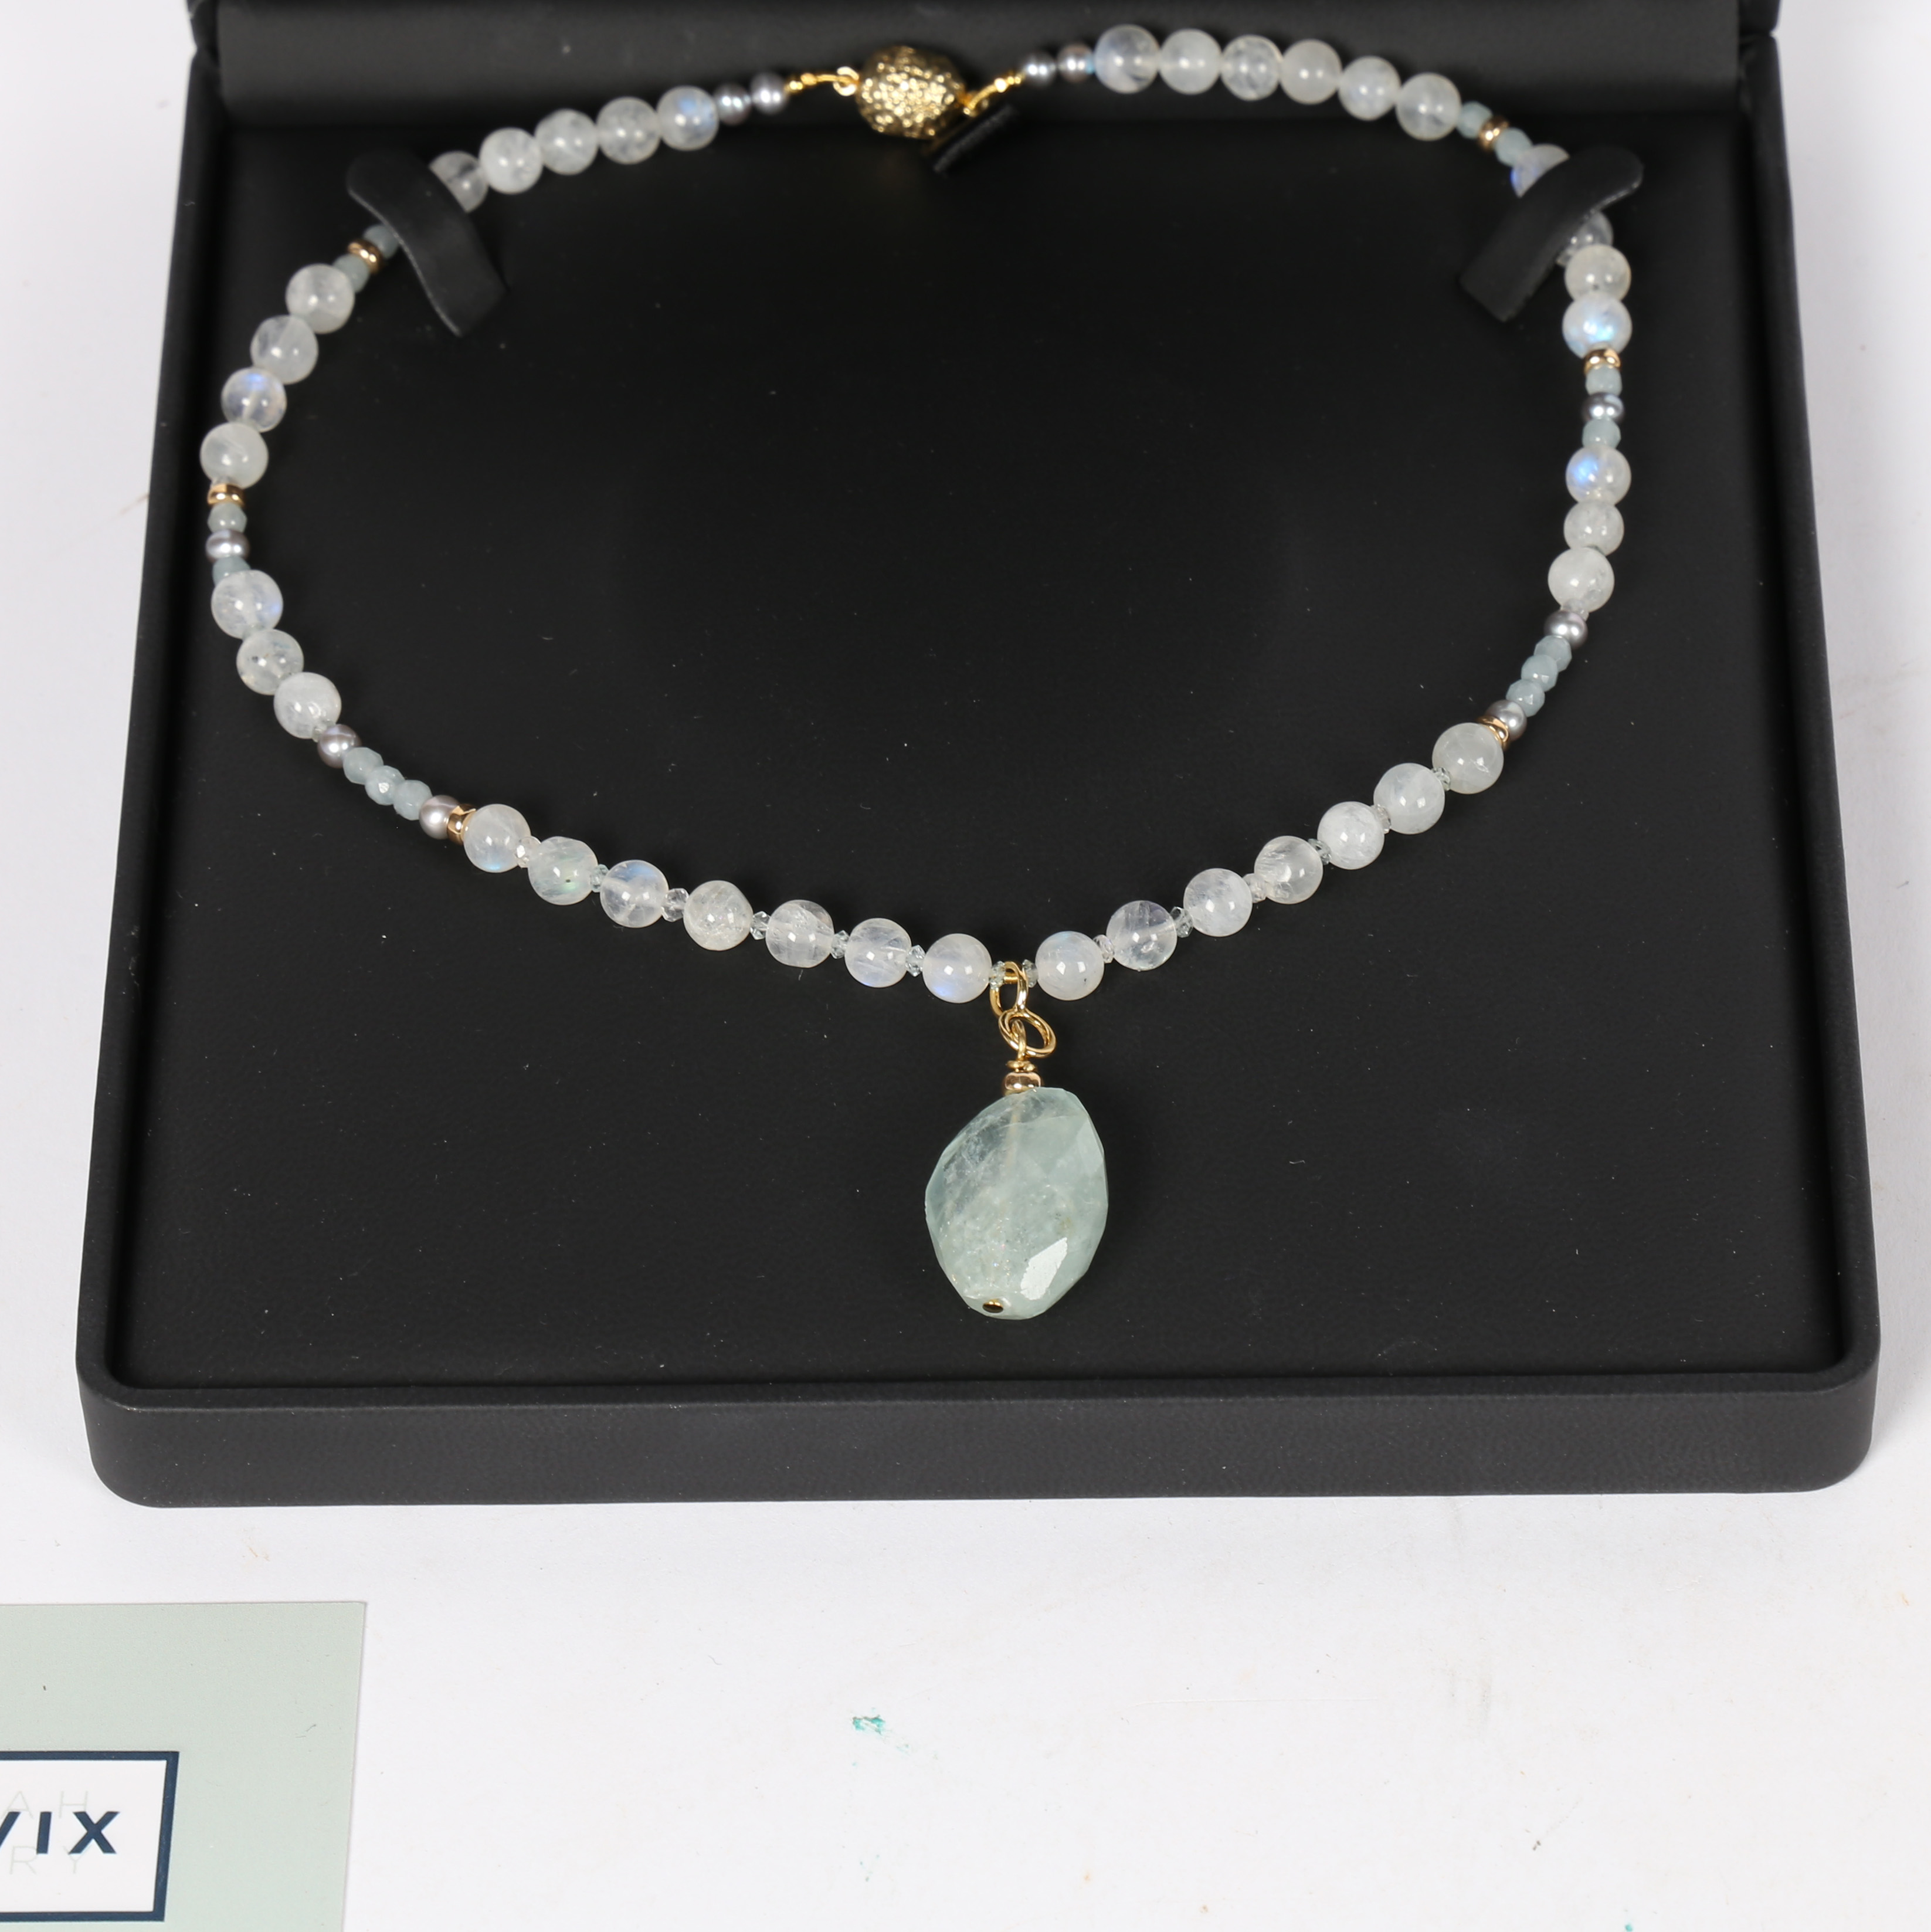 A UNIQUE ONE-OF-A-KIND MOONSTONE NECKLACE - Image 10 of 10